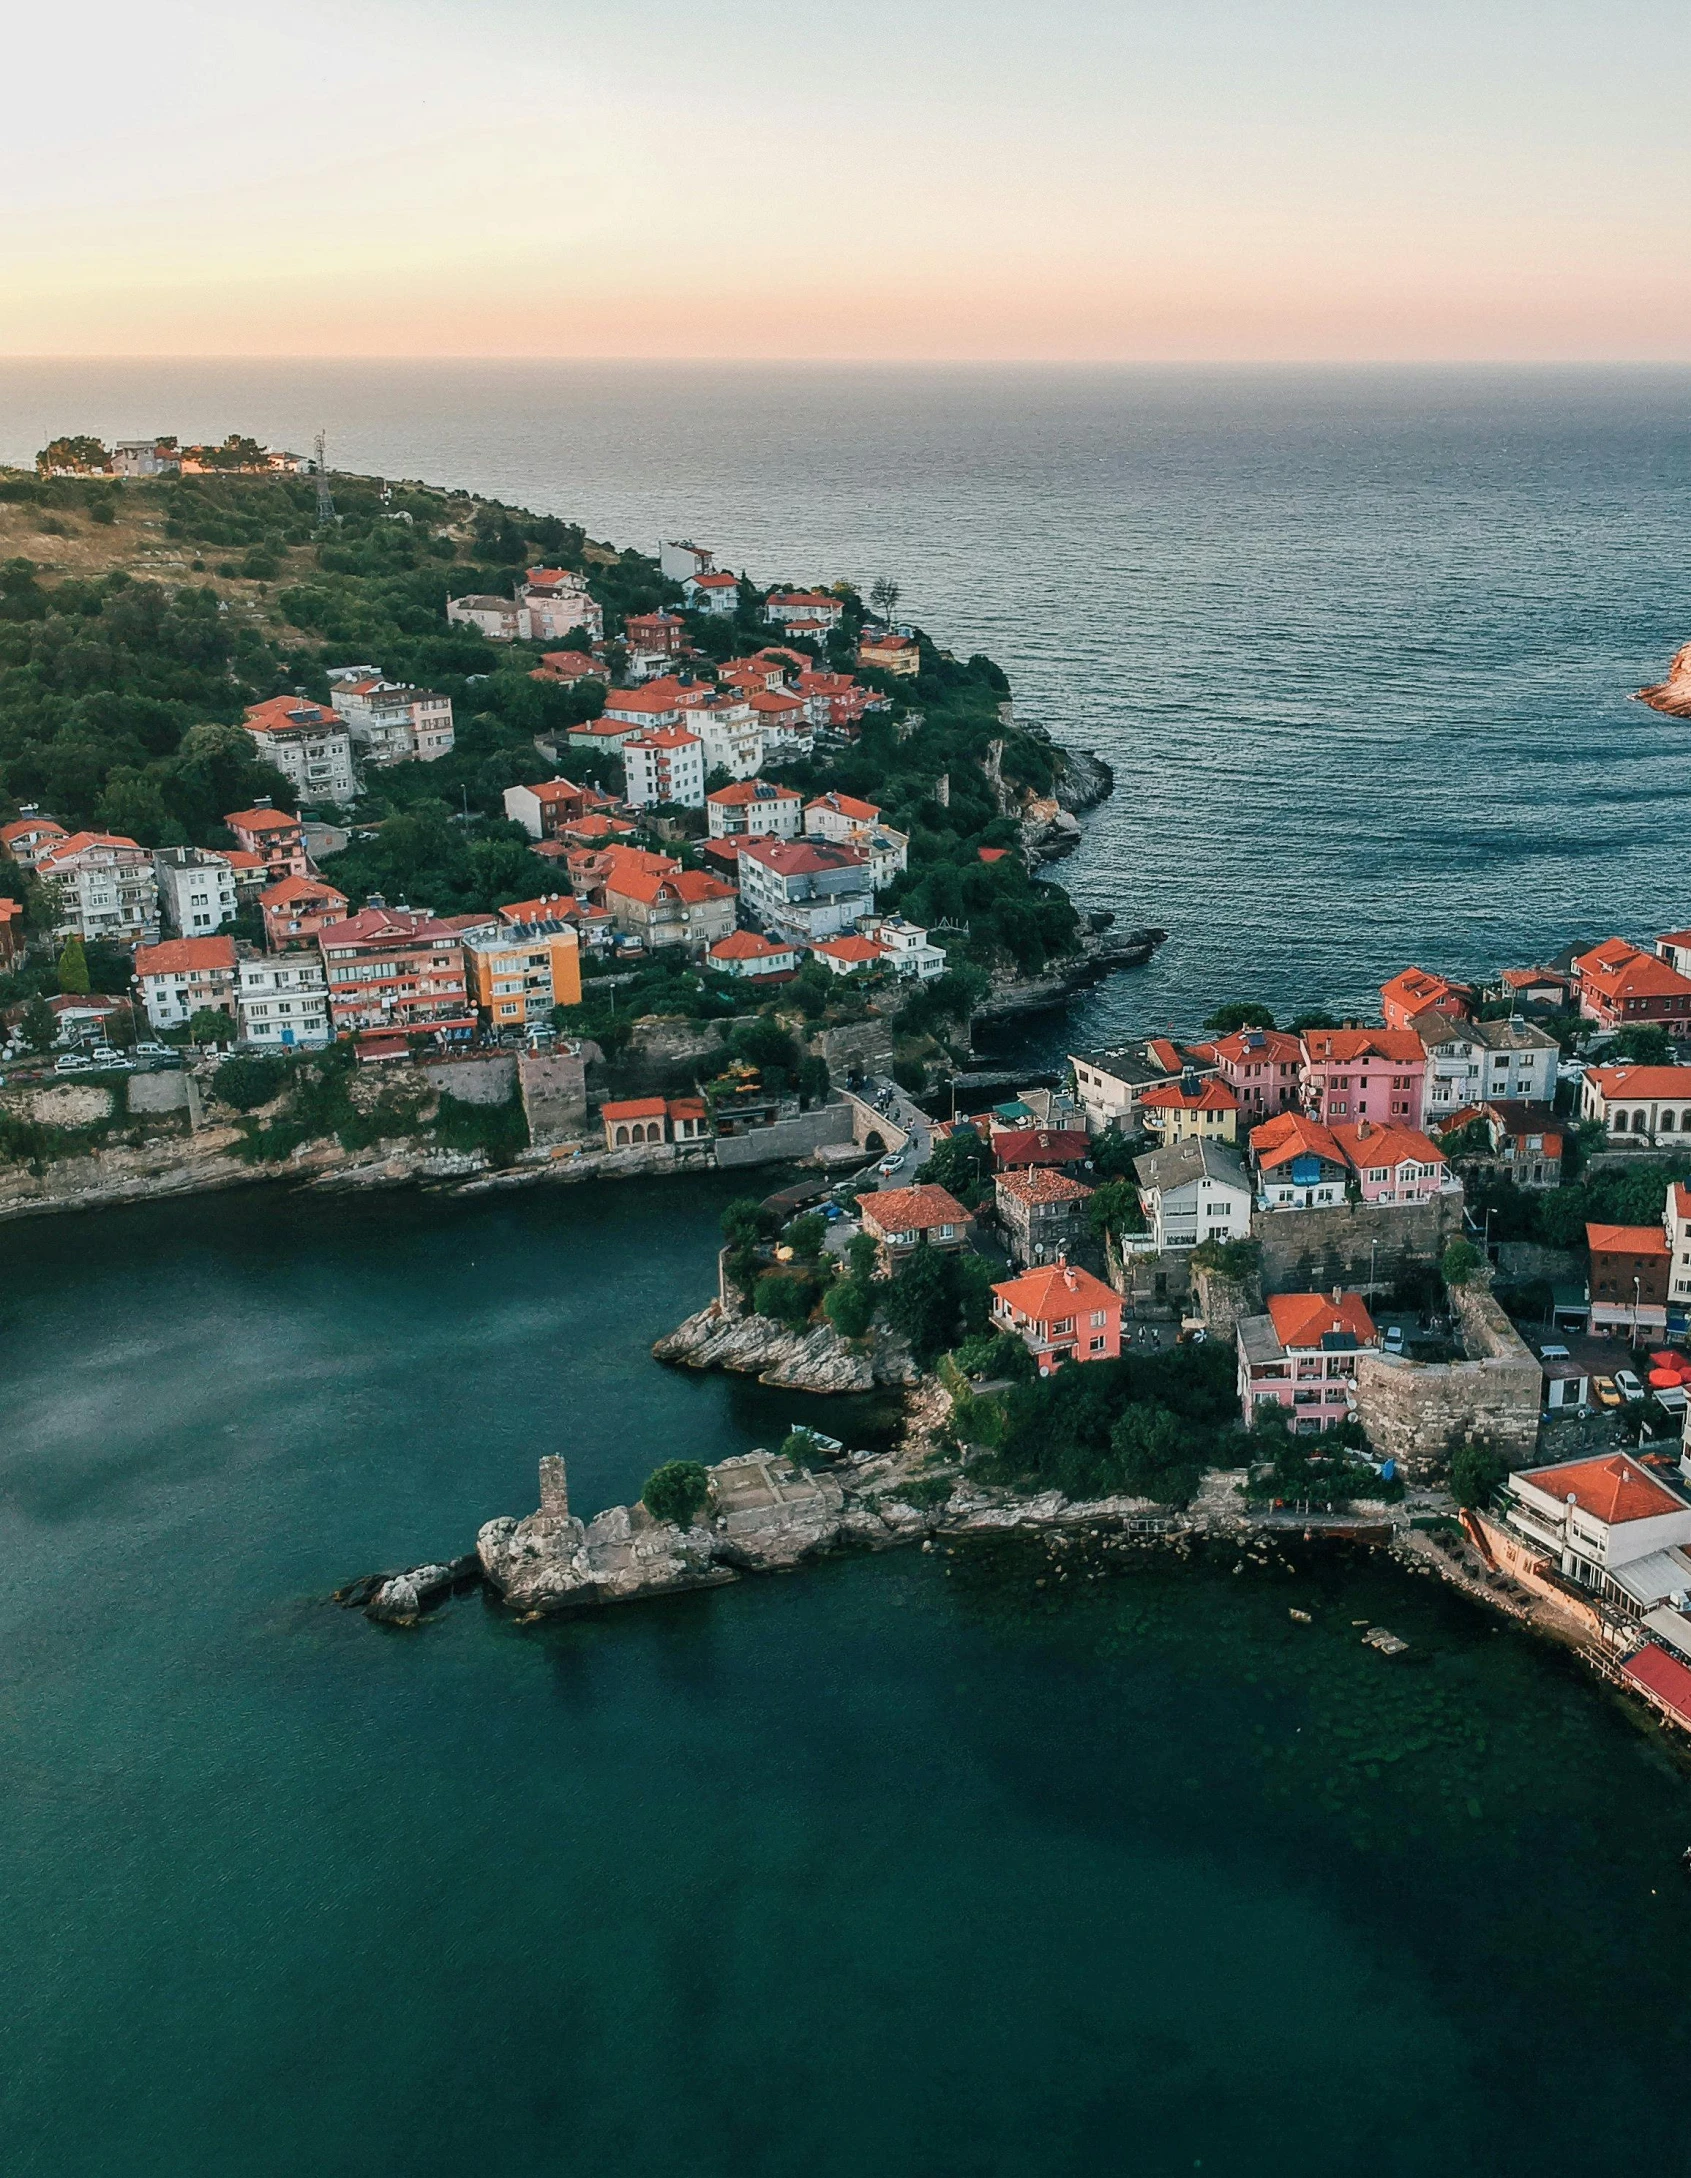 a small town in the middle of a body of water, black sea, profile image, lush surroundings, flatlay